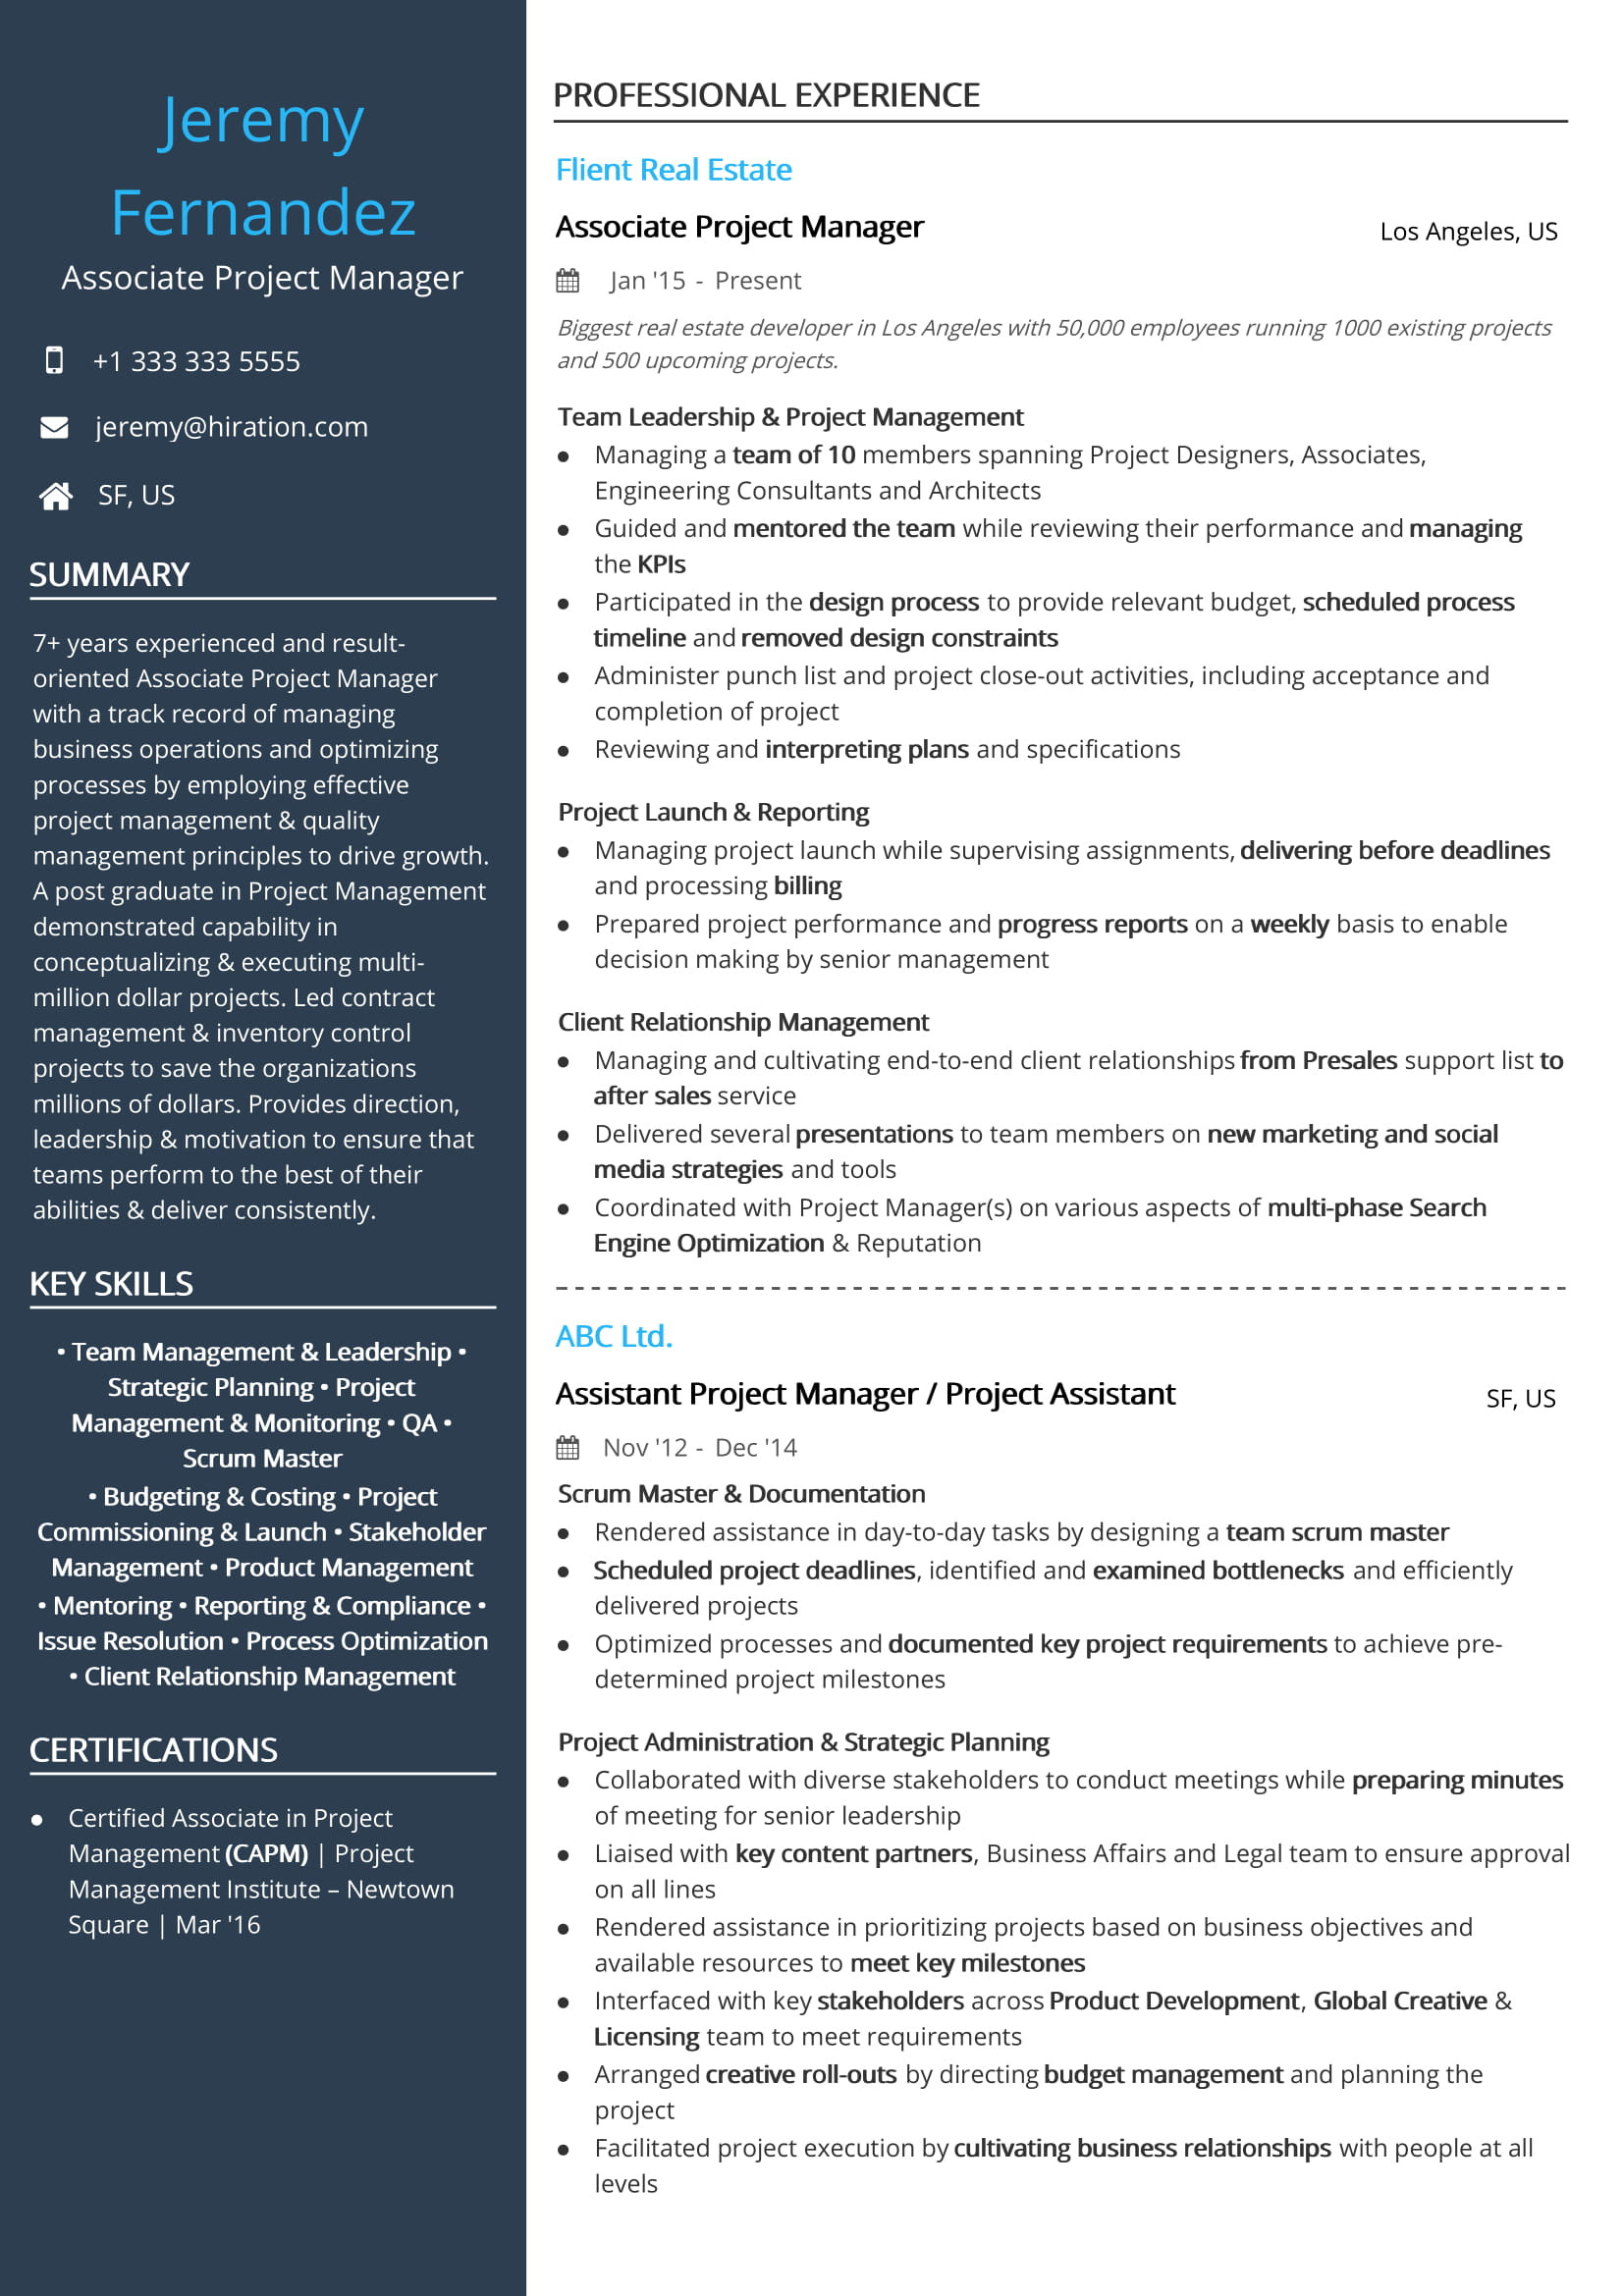 Sample Resume for Project Manager assistant Free associate Project Manager Resume Sample 2020 by Hiration